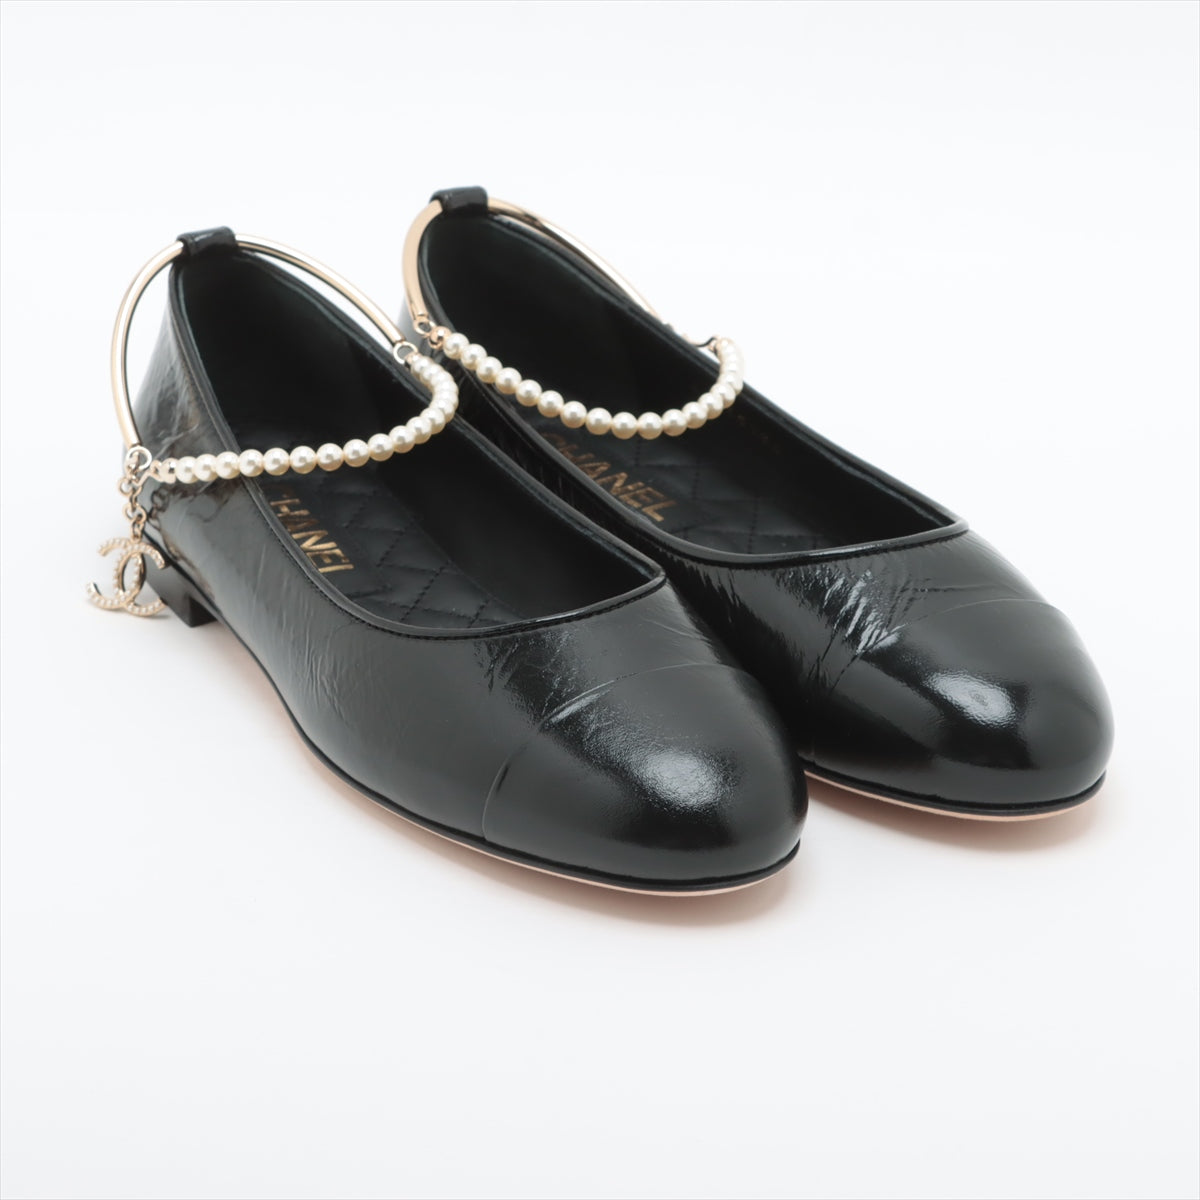 Chanel Coco Mark Camelia 23C Leather Strap Pumps EU38 Ladies' Black G38986 Imitation pearls Charm box There is a bag